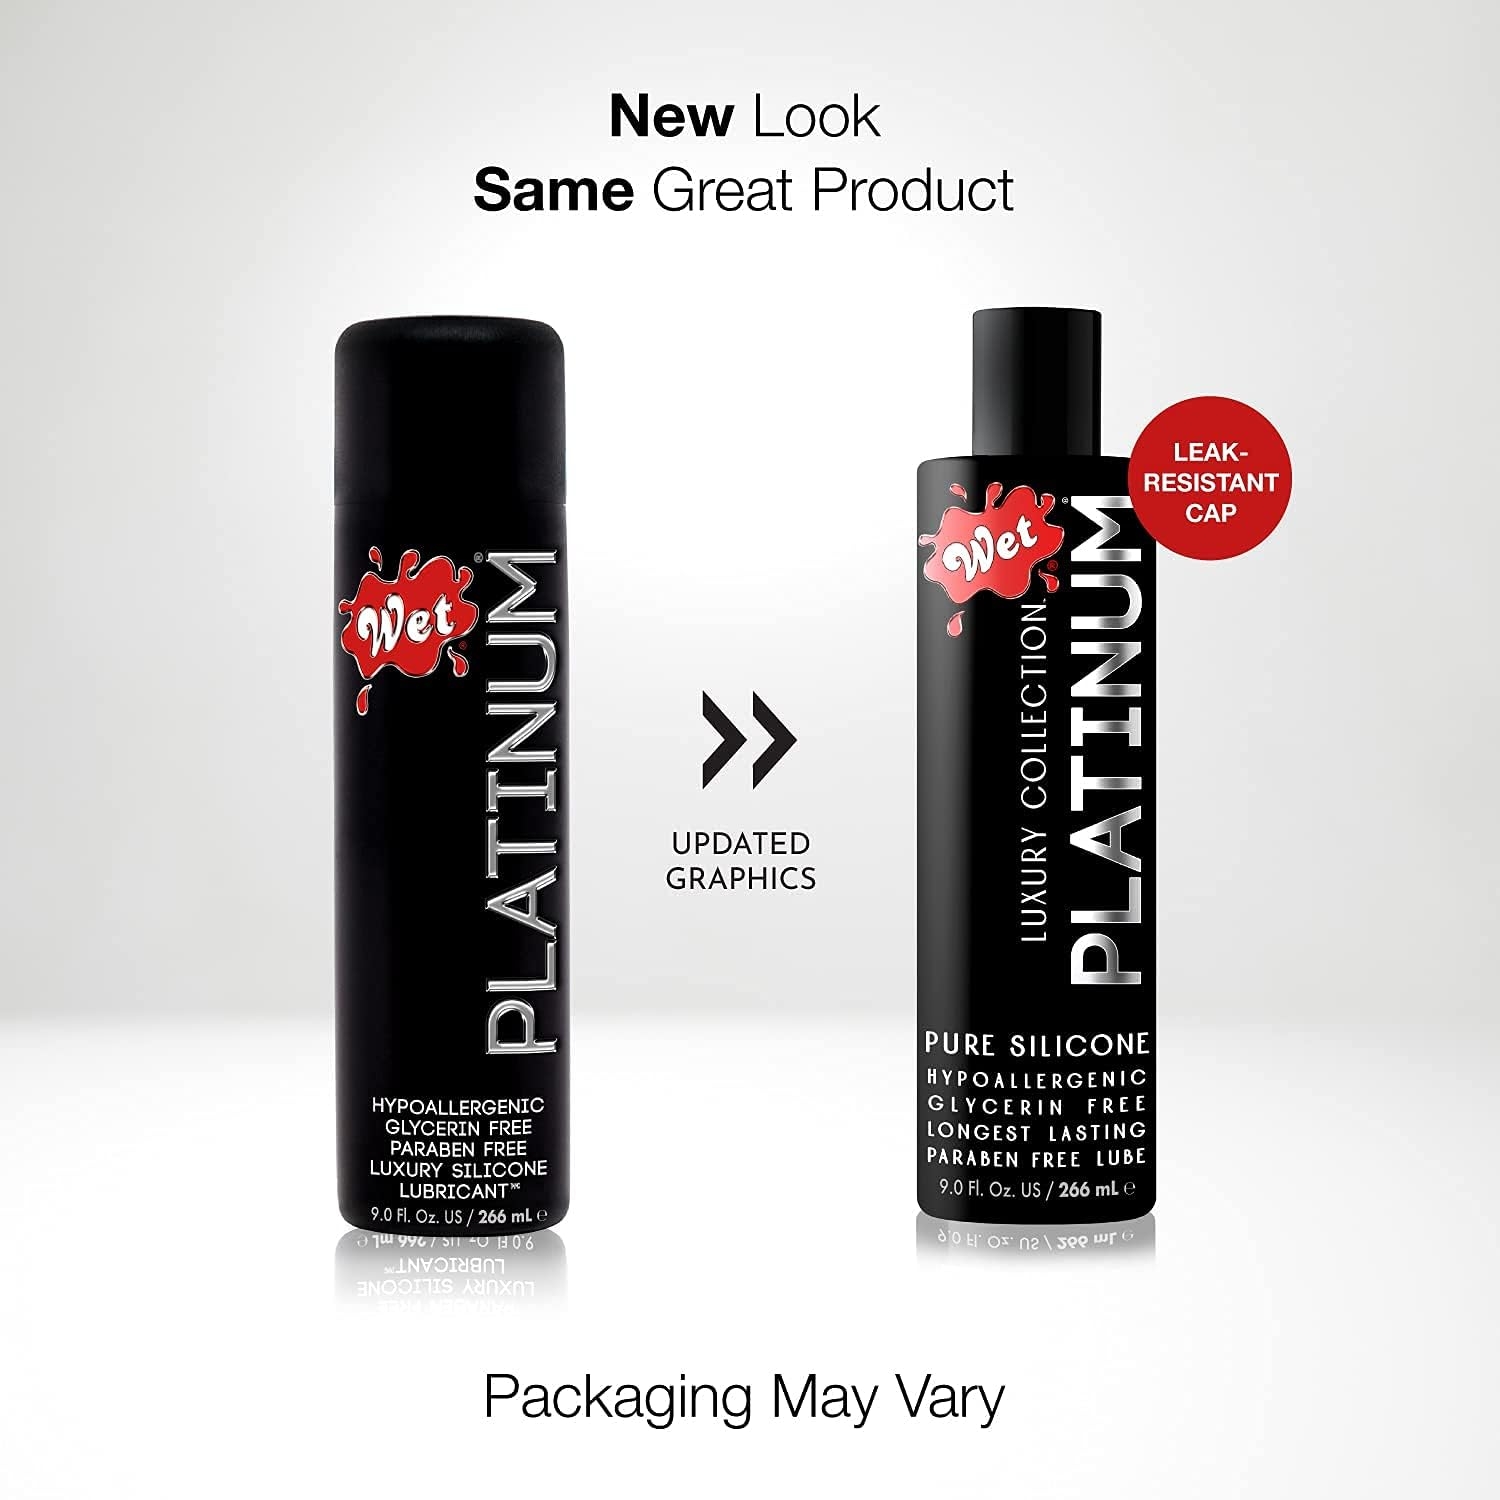 Wet Platinum Silicone Based Sex Lube 3 Sampler Premium Personal Luxury Lubricant for Men Women & Couples More Long Lasting Than Water Based Condom Safe Hypoallergenic Glycerin Paraben Free Intimacy